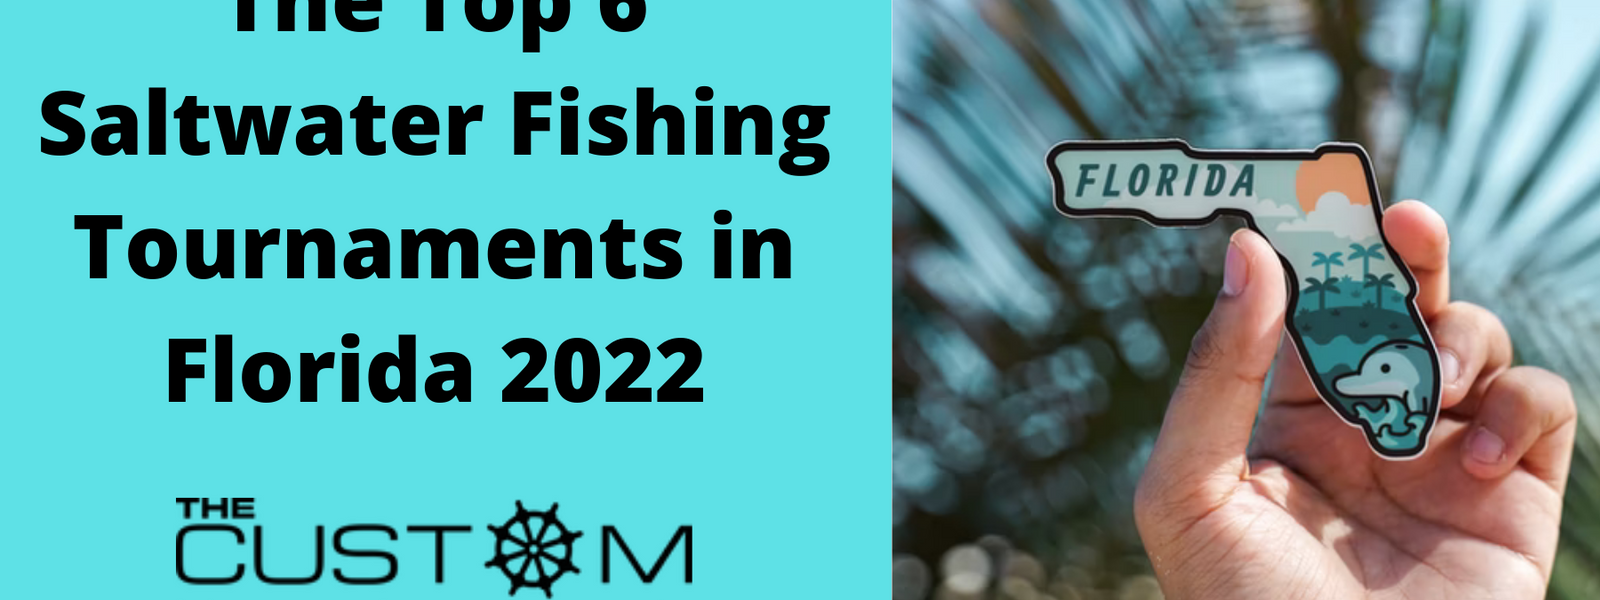 The Top 6 Saltwater Fishing Tournaments In Florida 2022